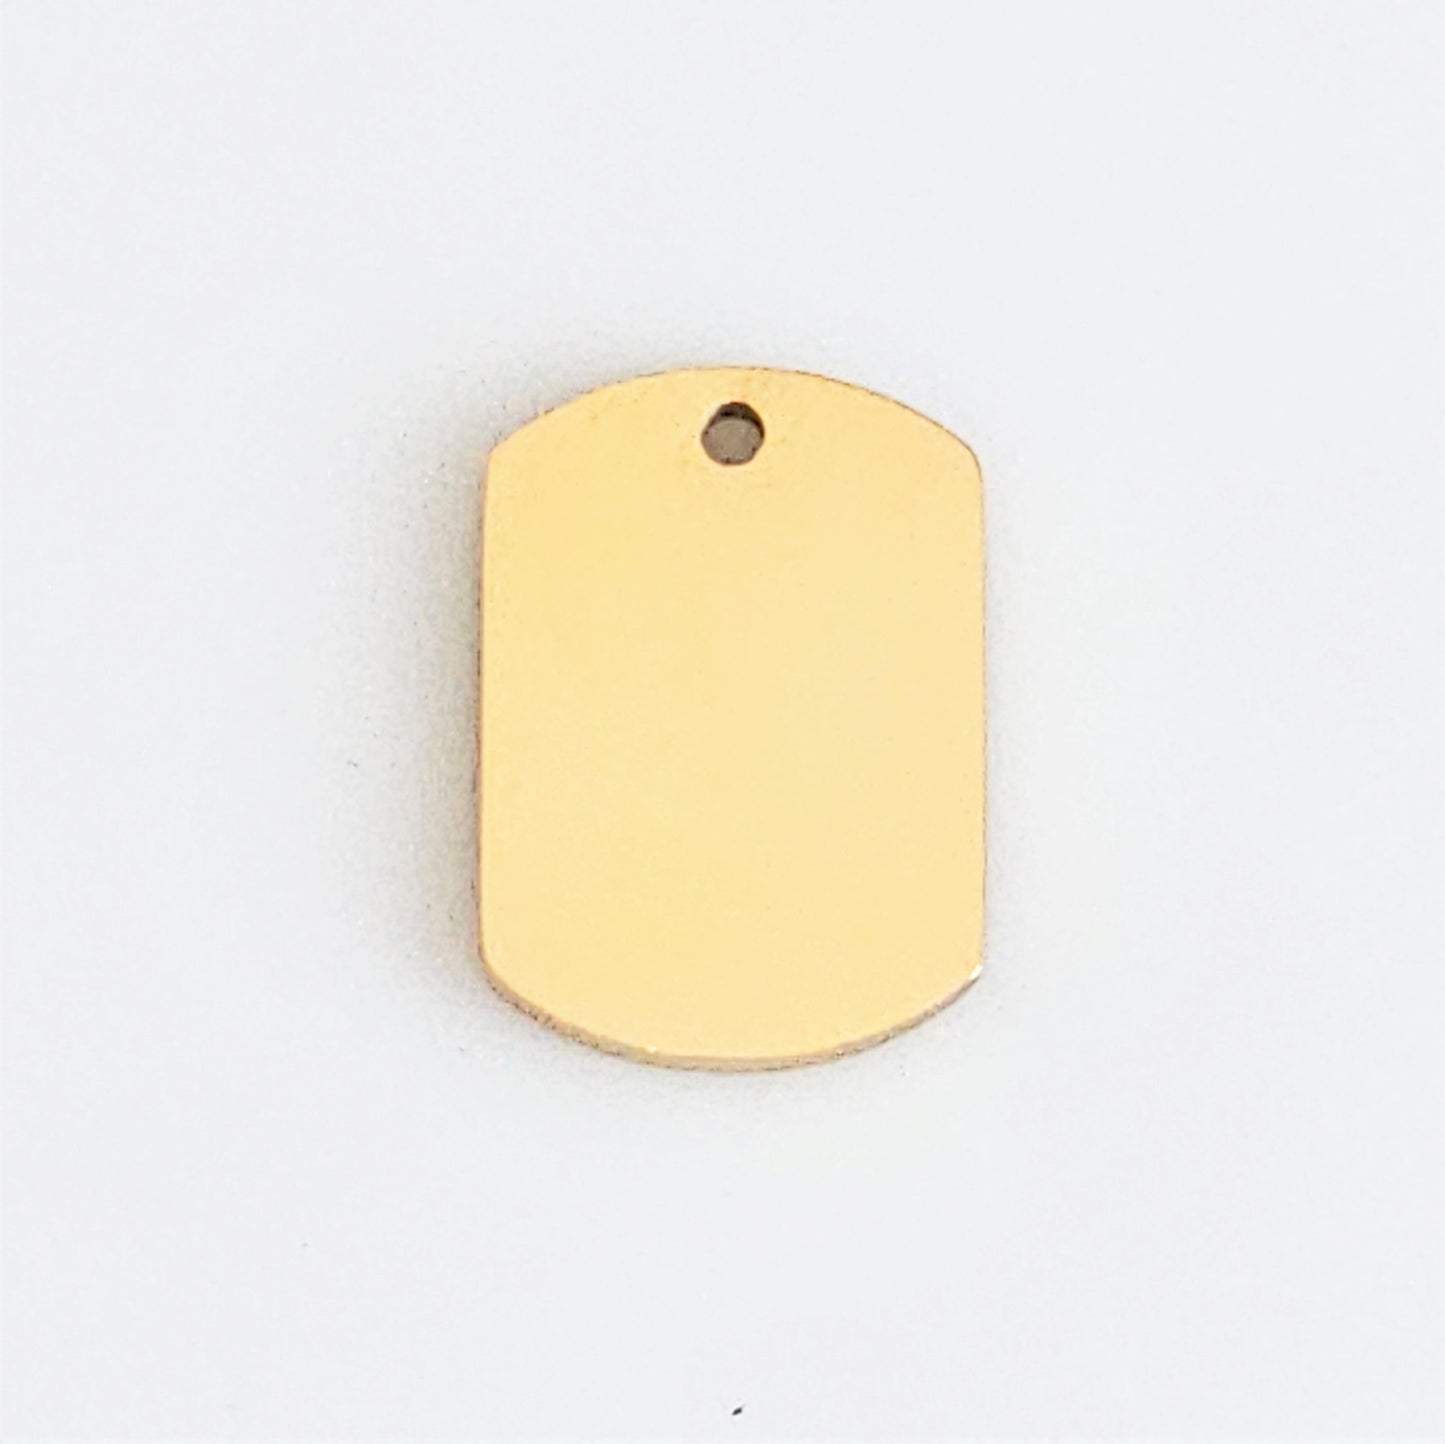 Gold Plated Stainless Steel - 1/2" x 3/4" Dog Tag